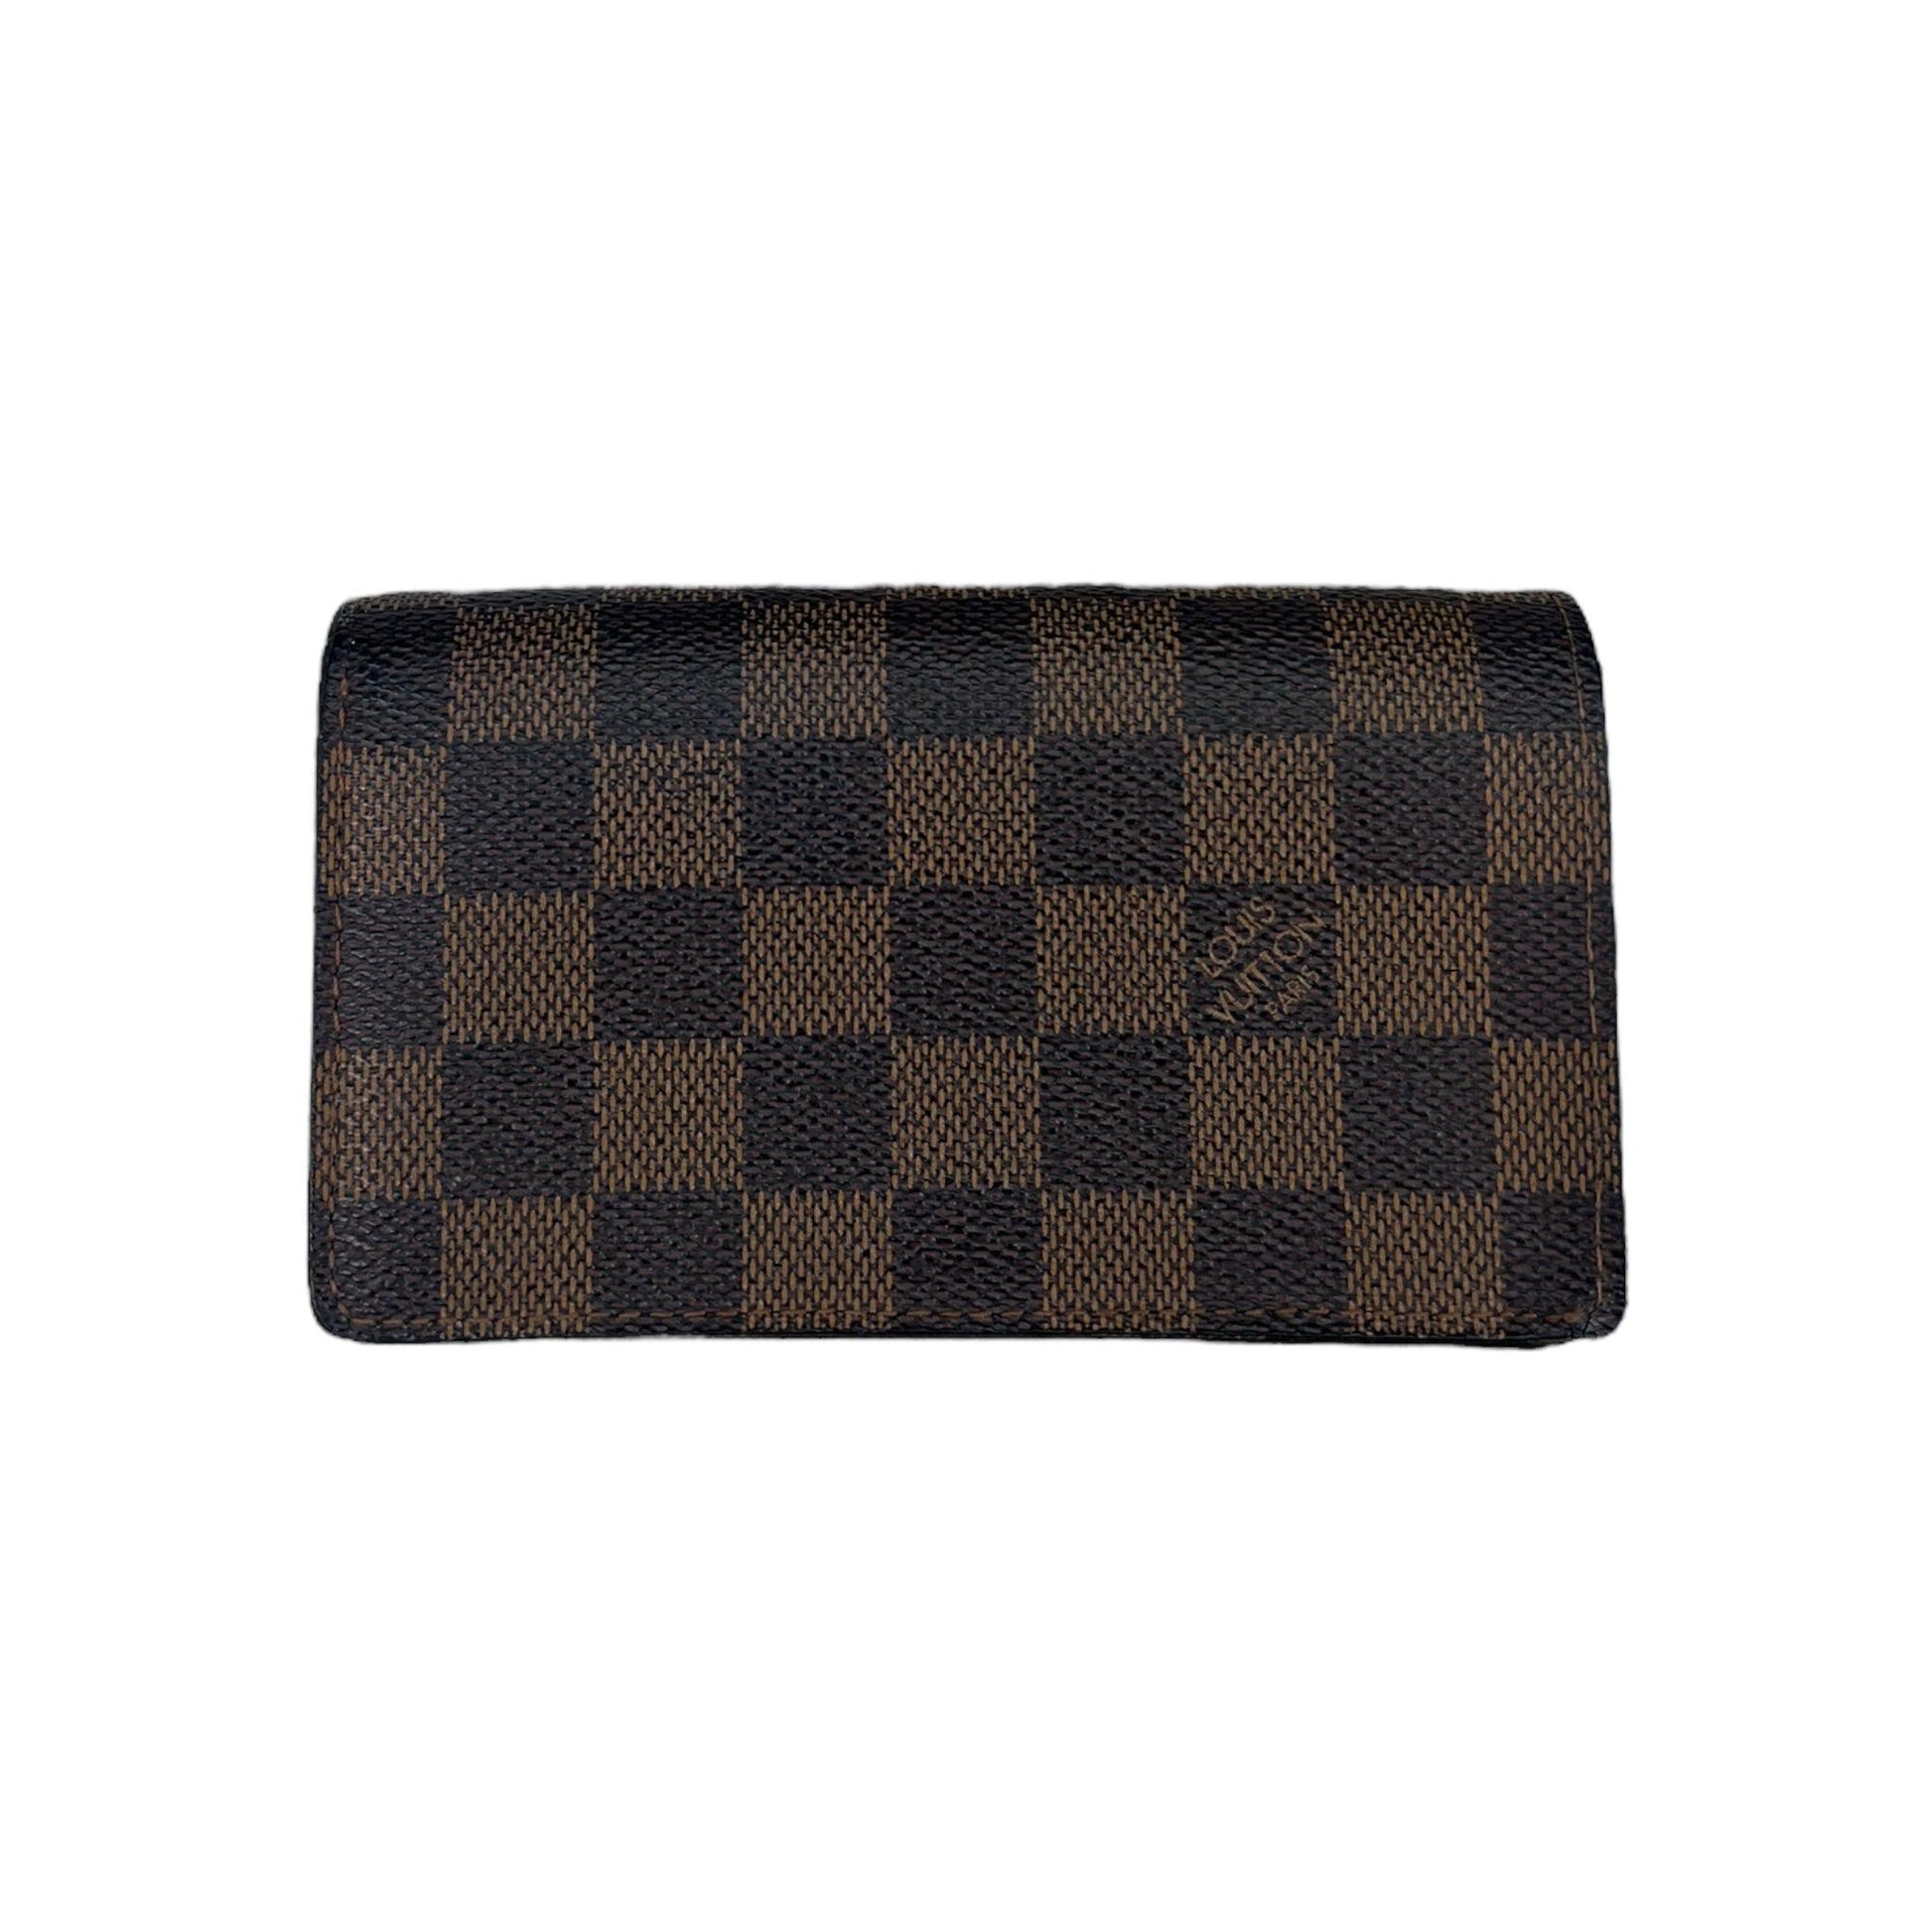 Louis Vuitton Fold Over Monogram Canvas Wallet in Brown